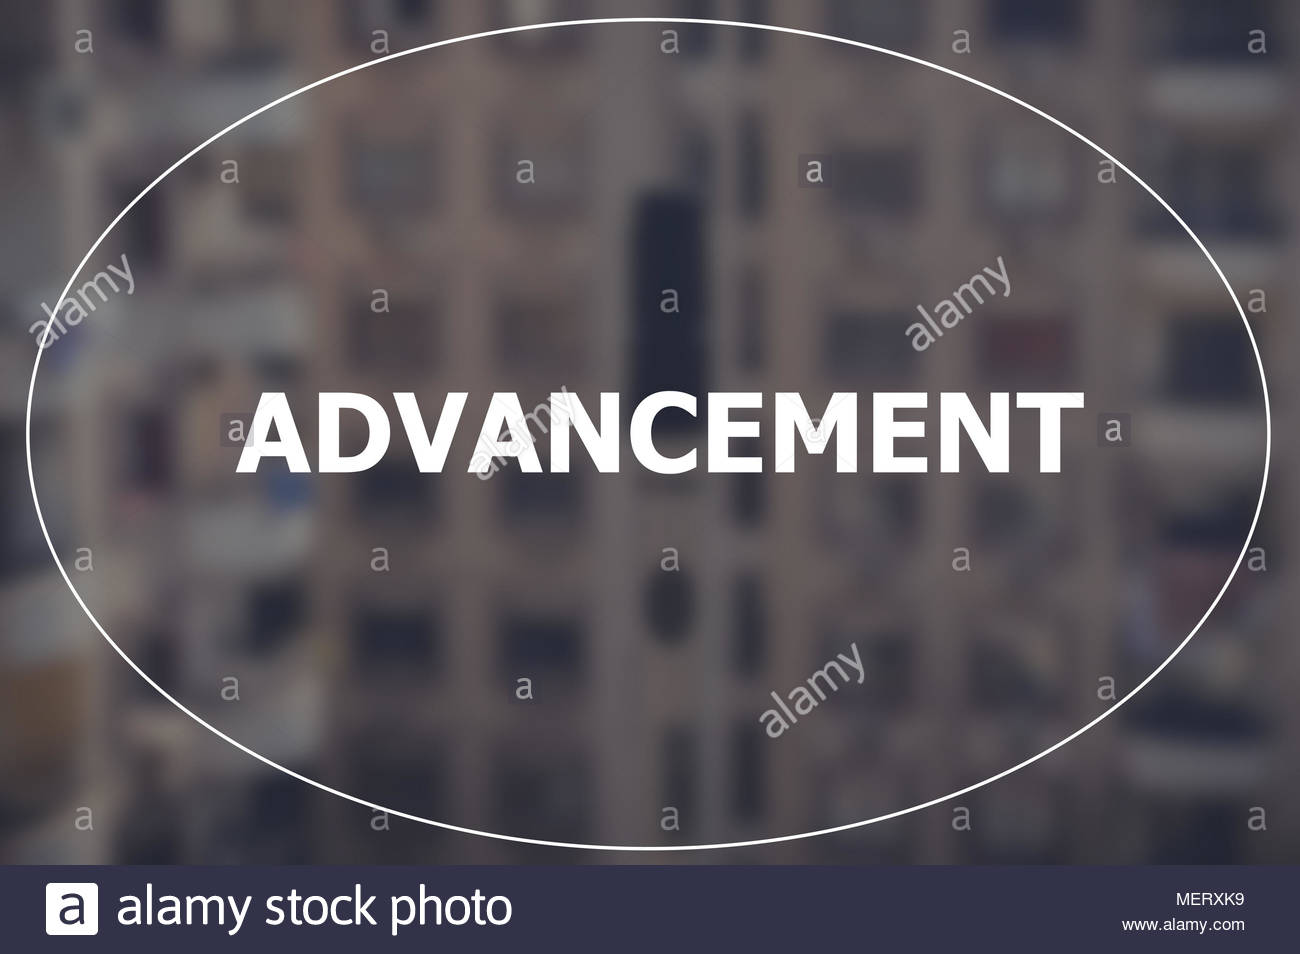 Advancement Word With Blurring Business Background Stock Photo